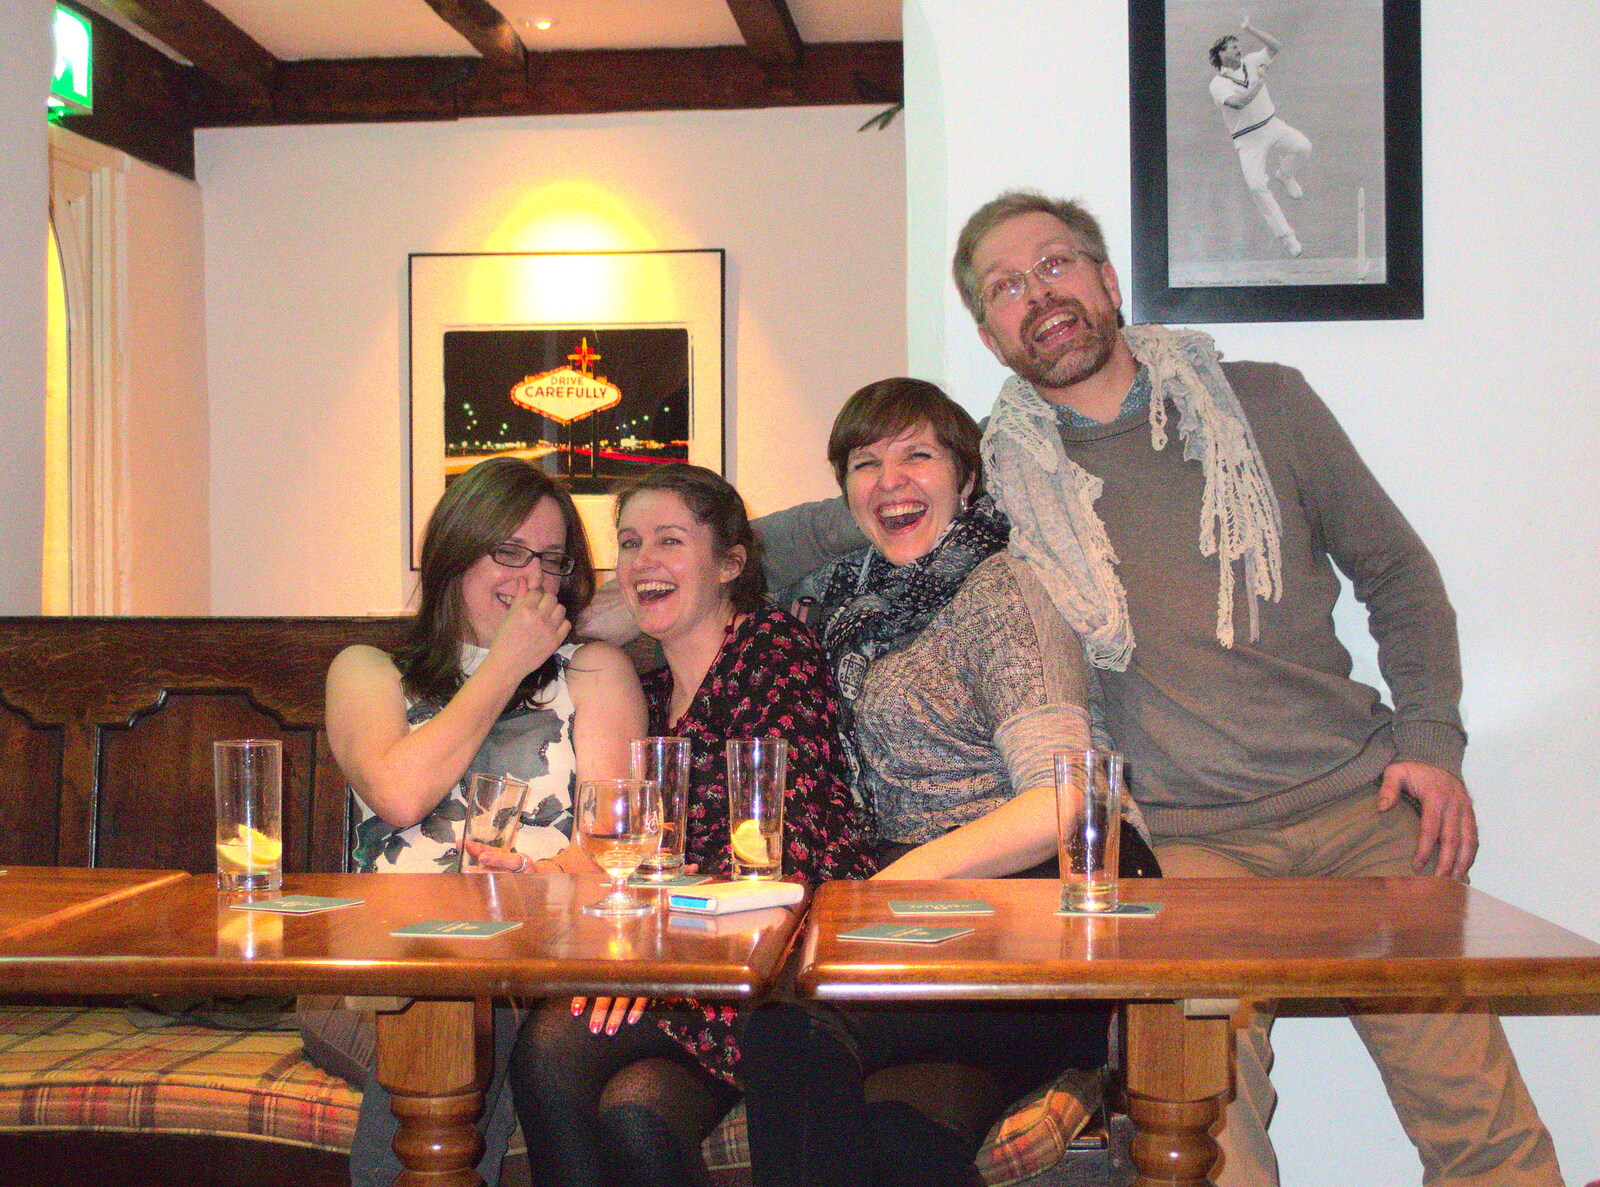 More amusement from New Year's Eve at the Oaksmere, Brome, Suffolk - 31st December 2014